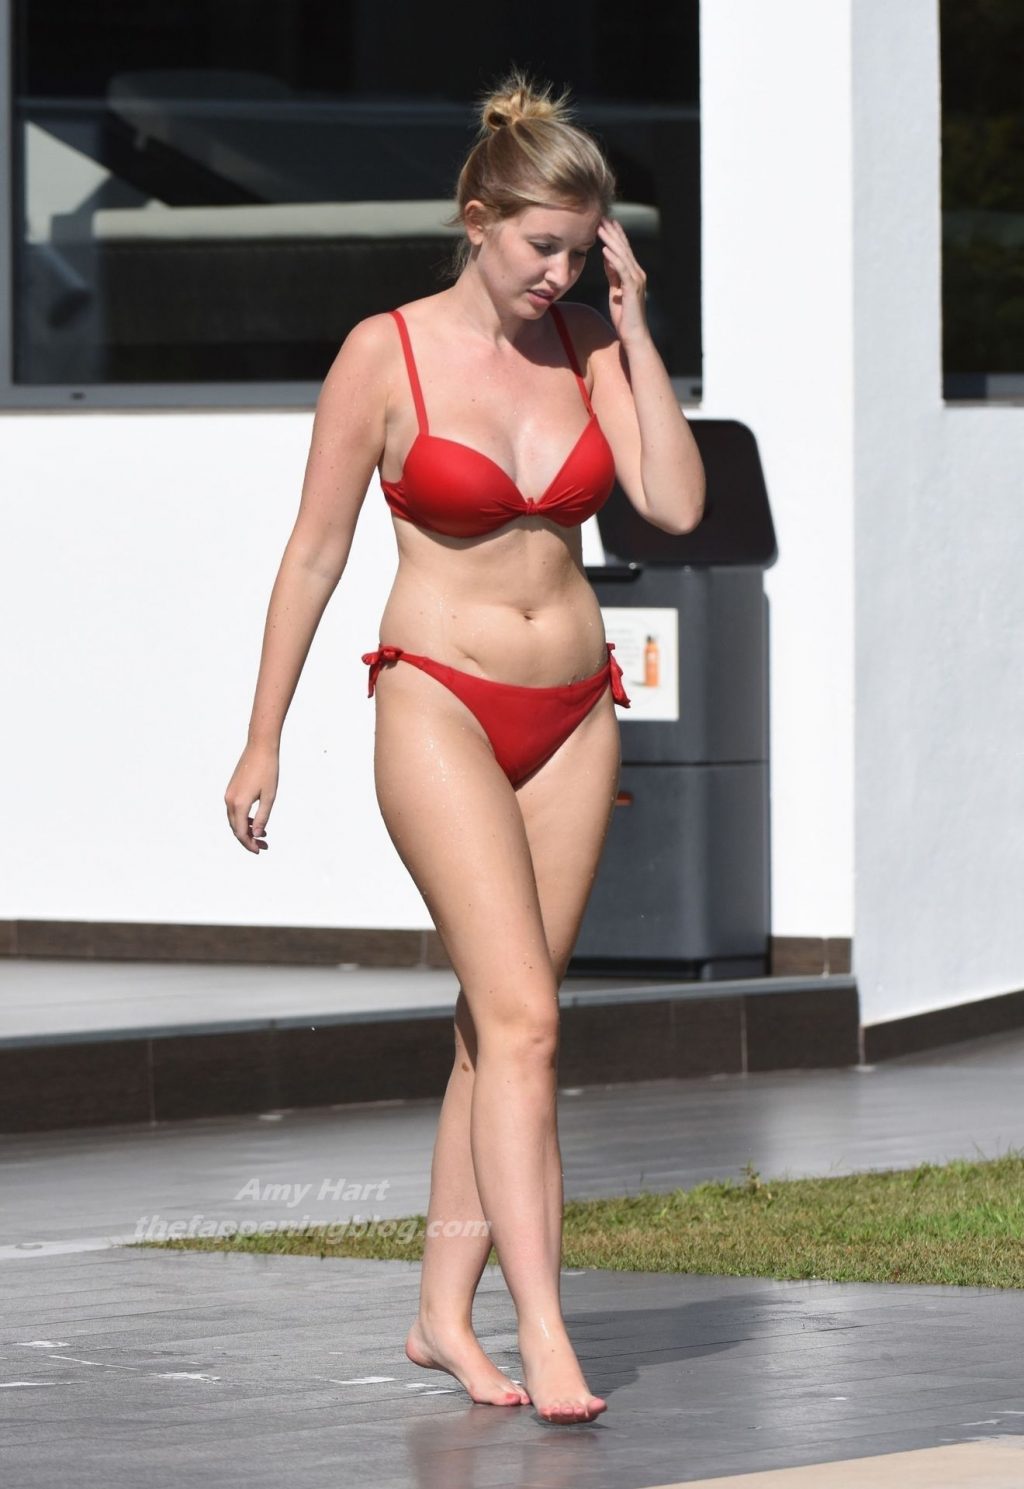 Amy Hart Stuns in a Fiery Red Bikini Soaking in the Sweltering Heat on Holiday in Portugal (31 Photos)